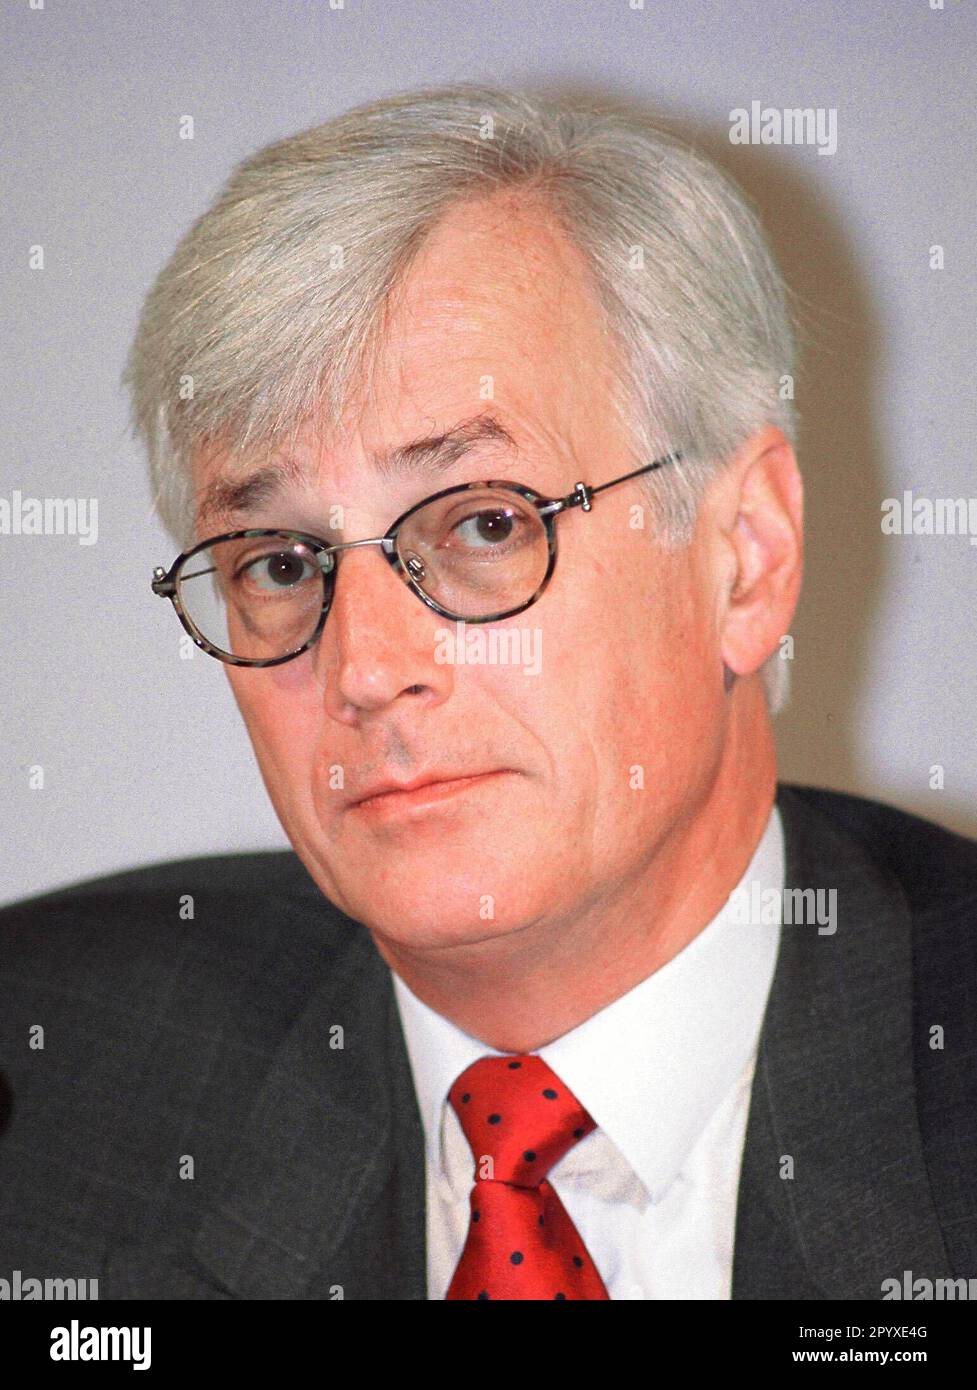 Dr. Manfred Gentz, Member of the Board of Management of DaimlerChrysler AG, responsible for Finance-Controlling. [automated translation] Stock Photo